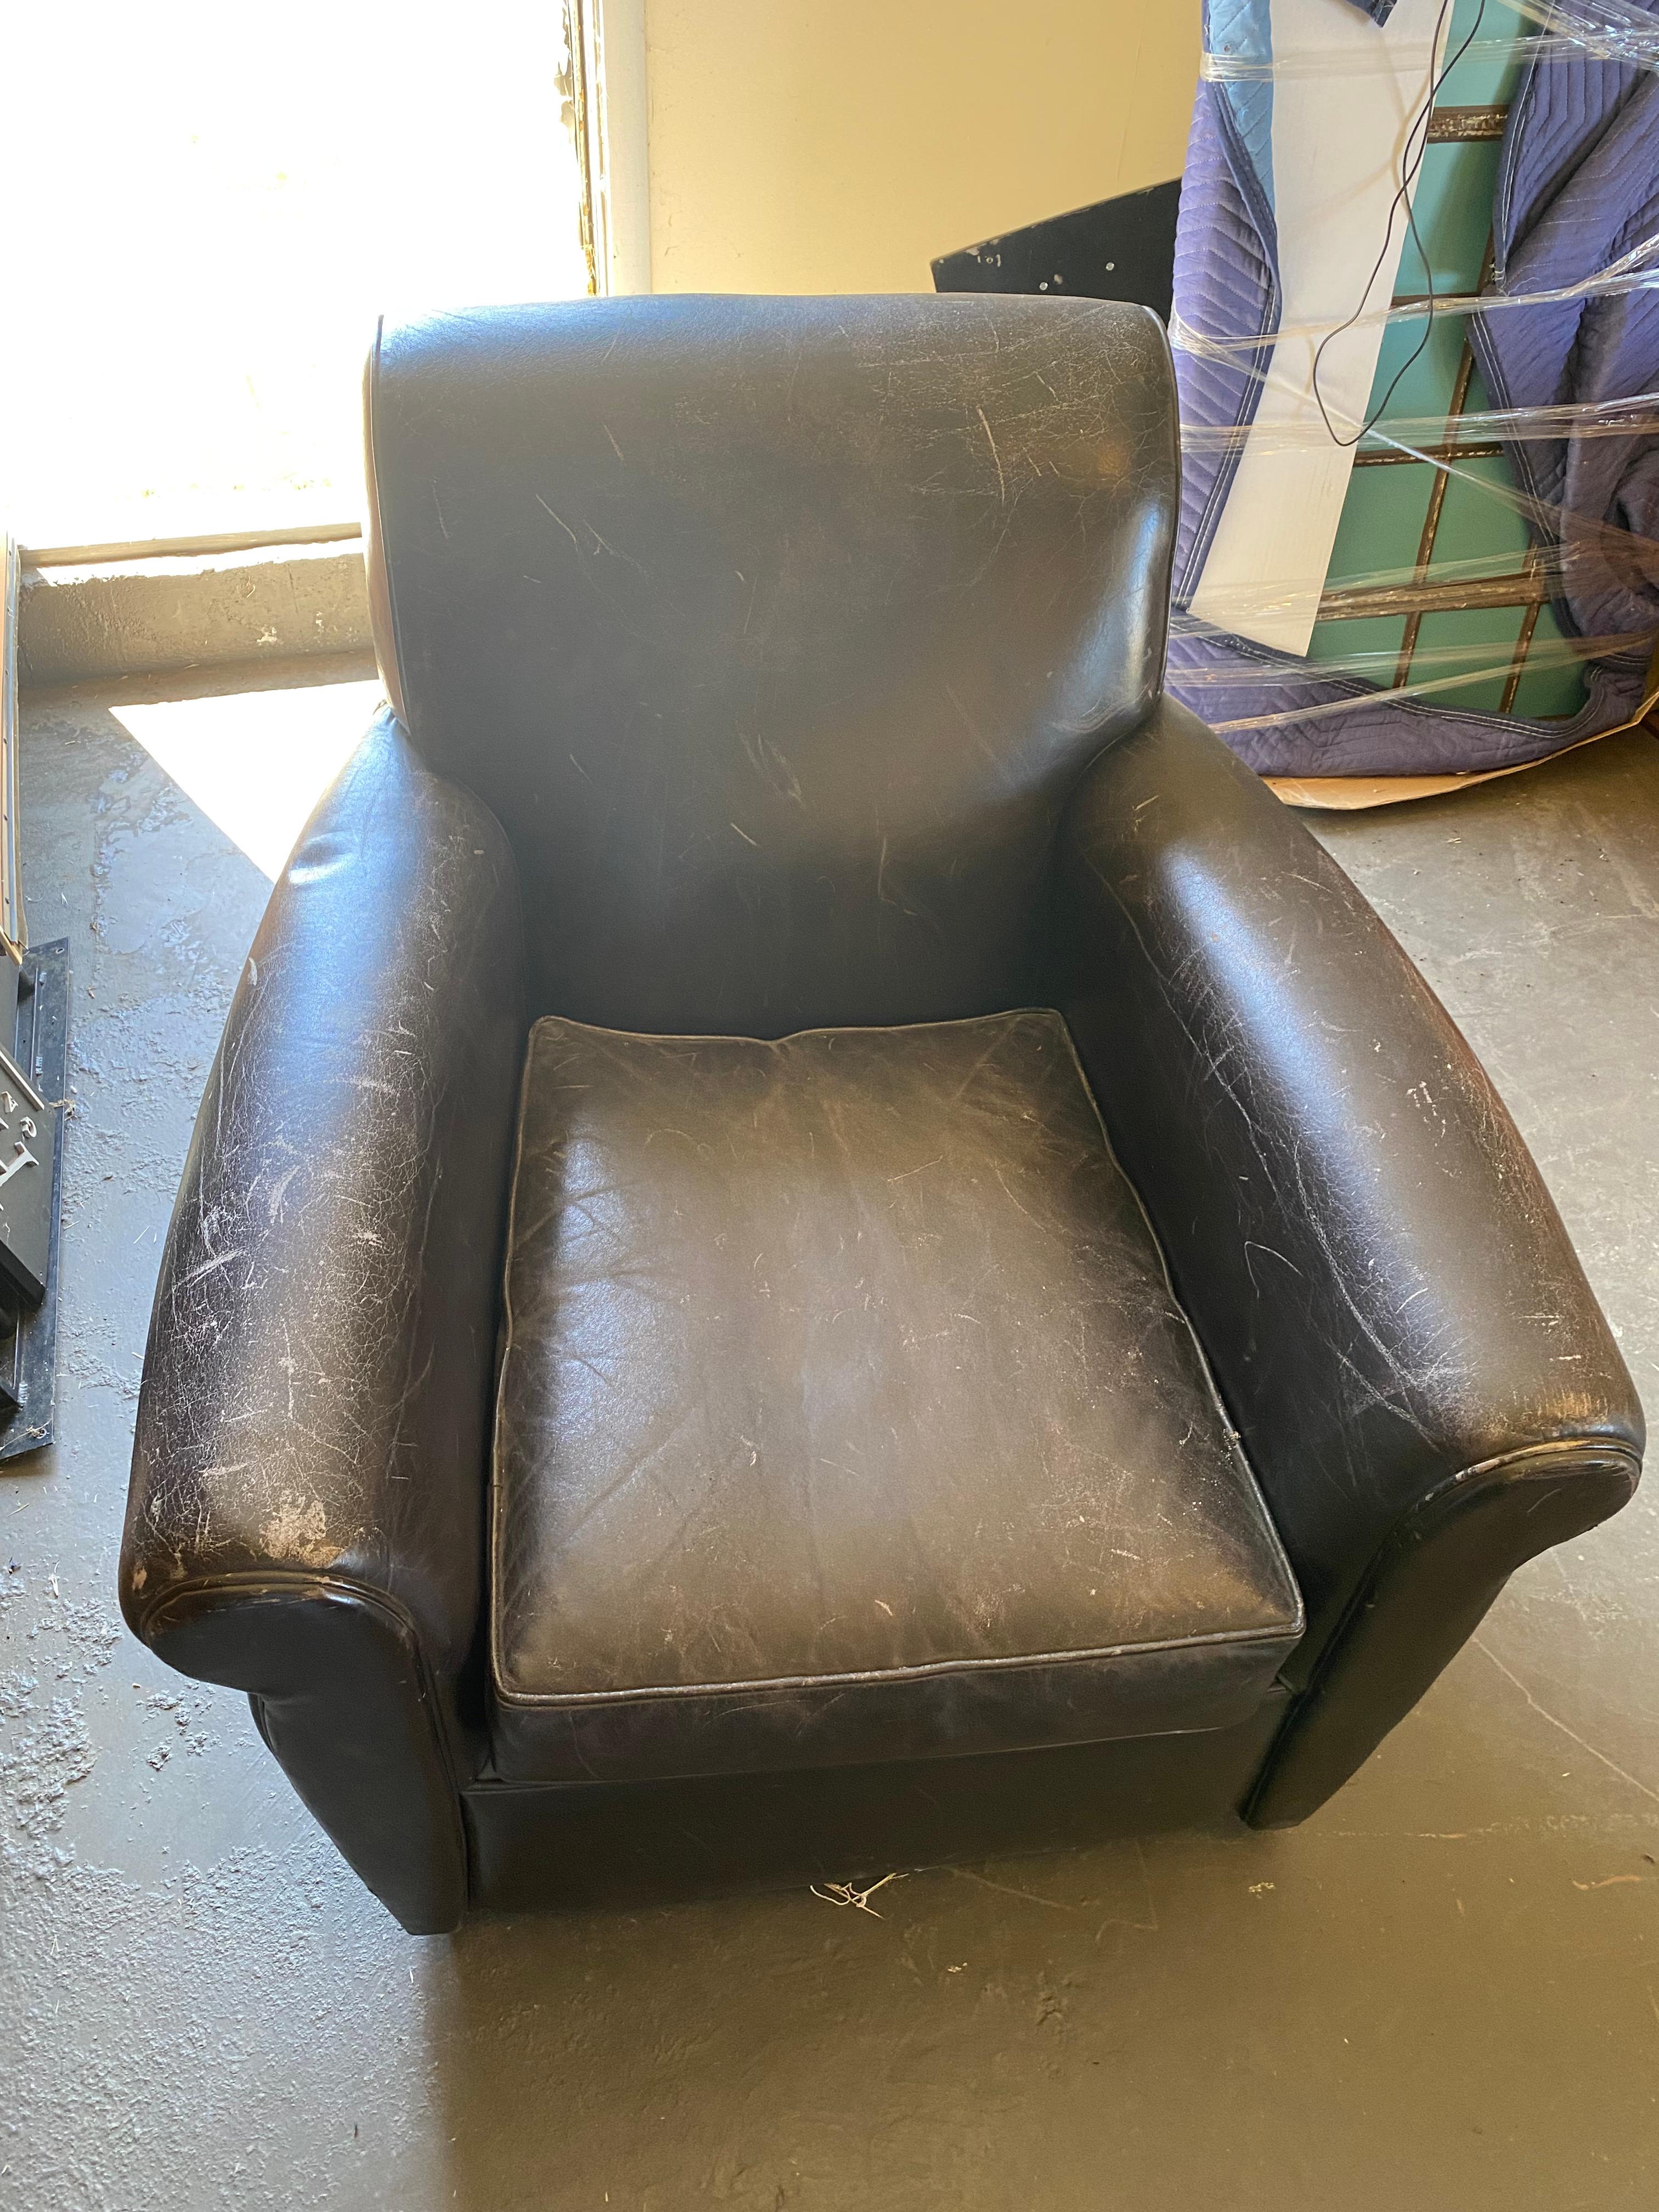 Vintage leather club chair by San Francisco Designer M. Gold. The back has a nice piping detail.